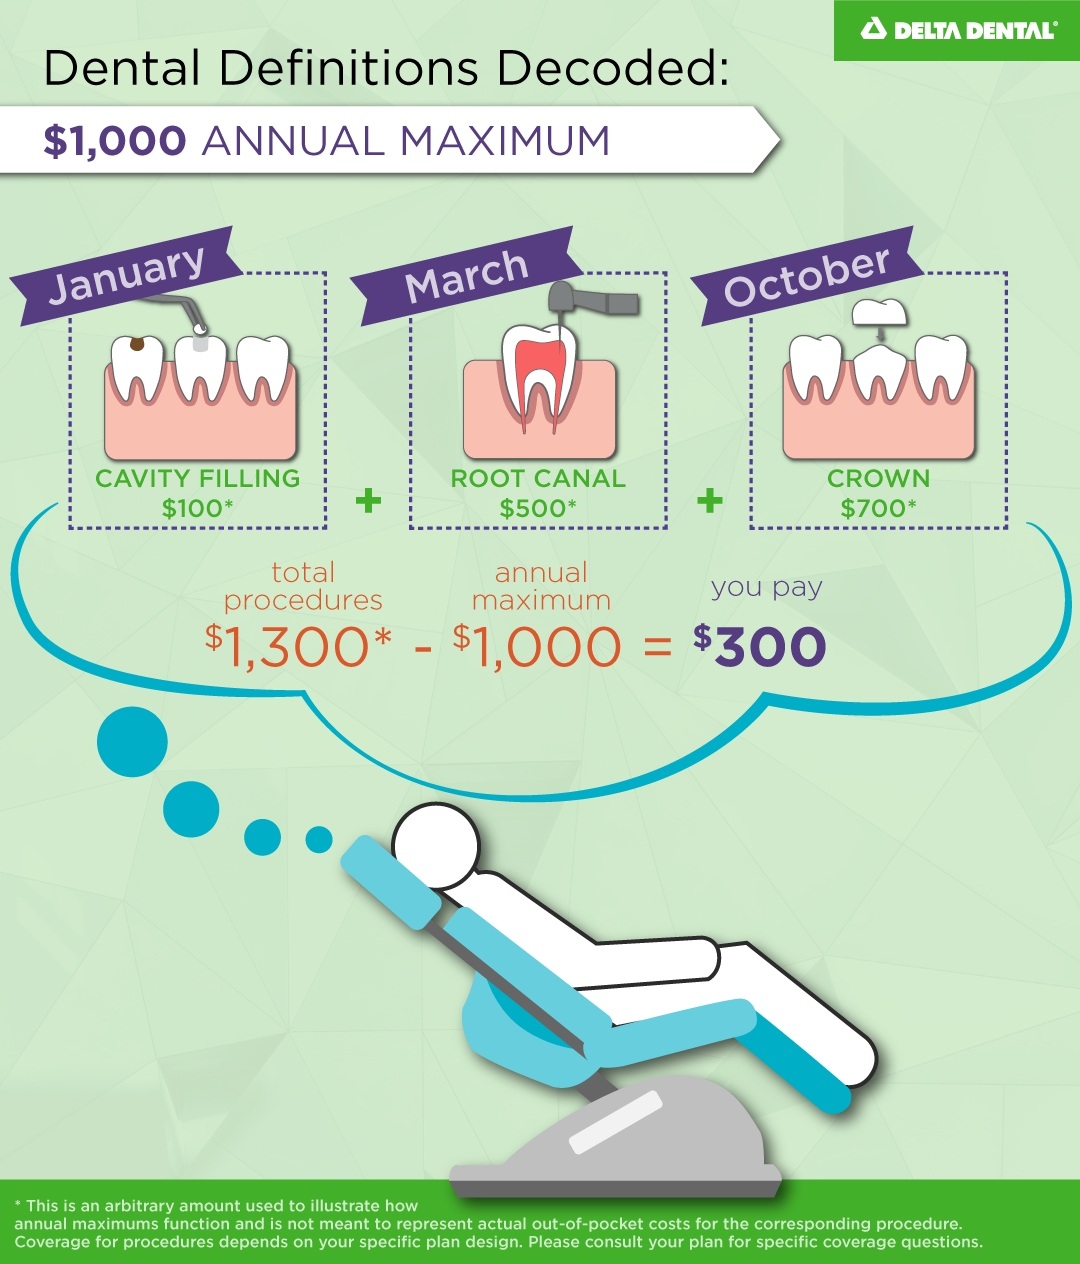 Dental Benefits Explained | What Is An Annual Maximum